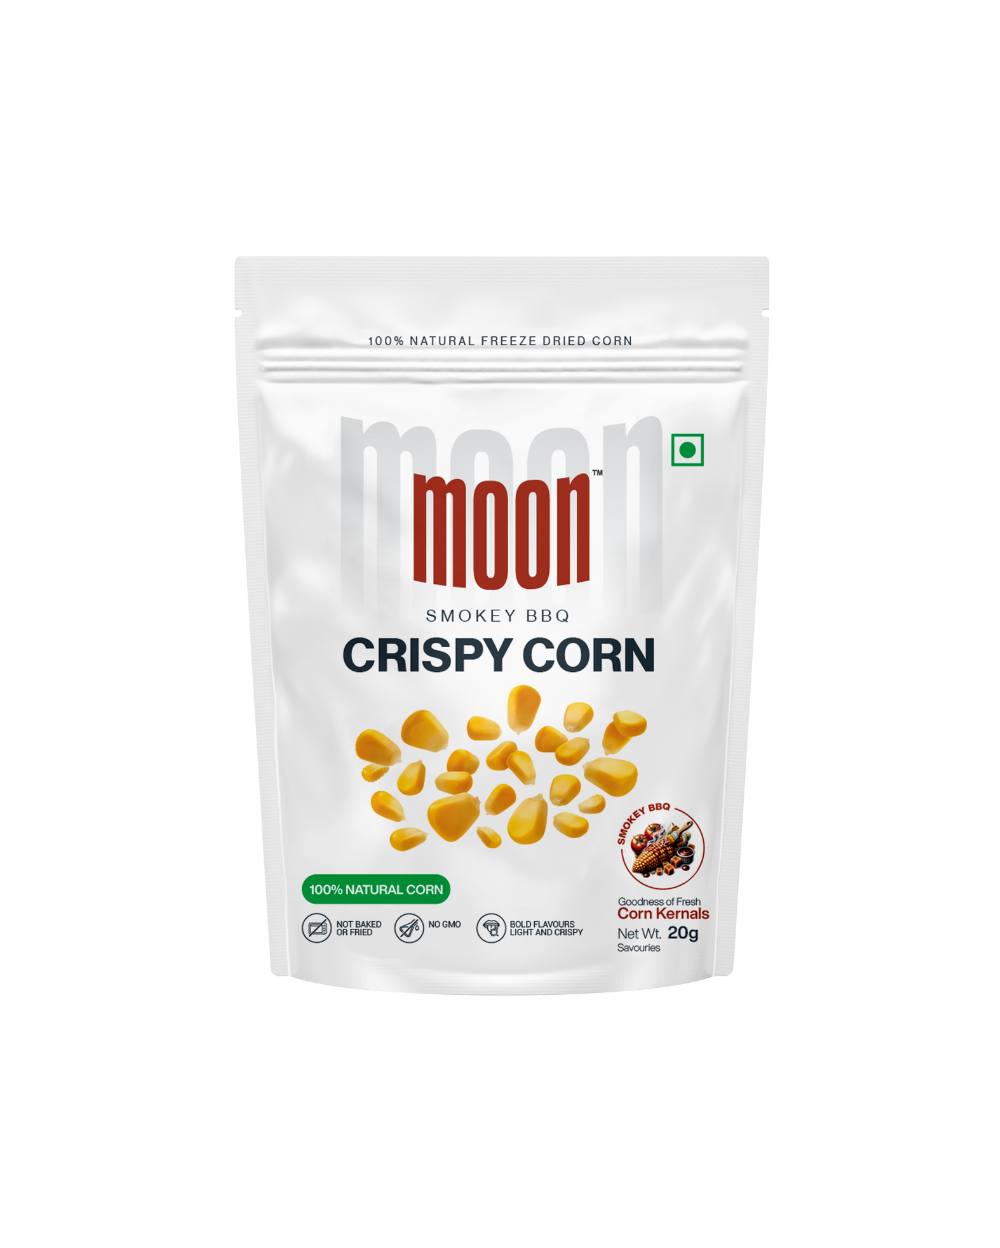 A bag of Freeze Dried Crispy Corn Smokey BBQ chips from MOONFREEZE FOODS PRIVATE LIMITED on a white background.